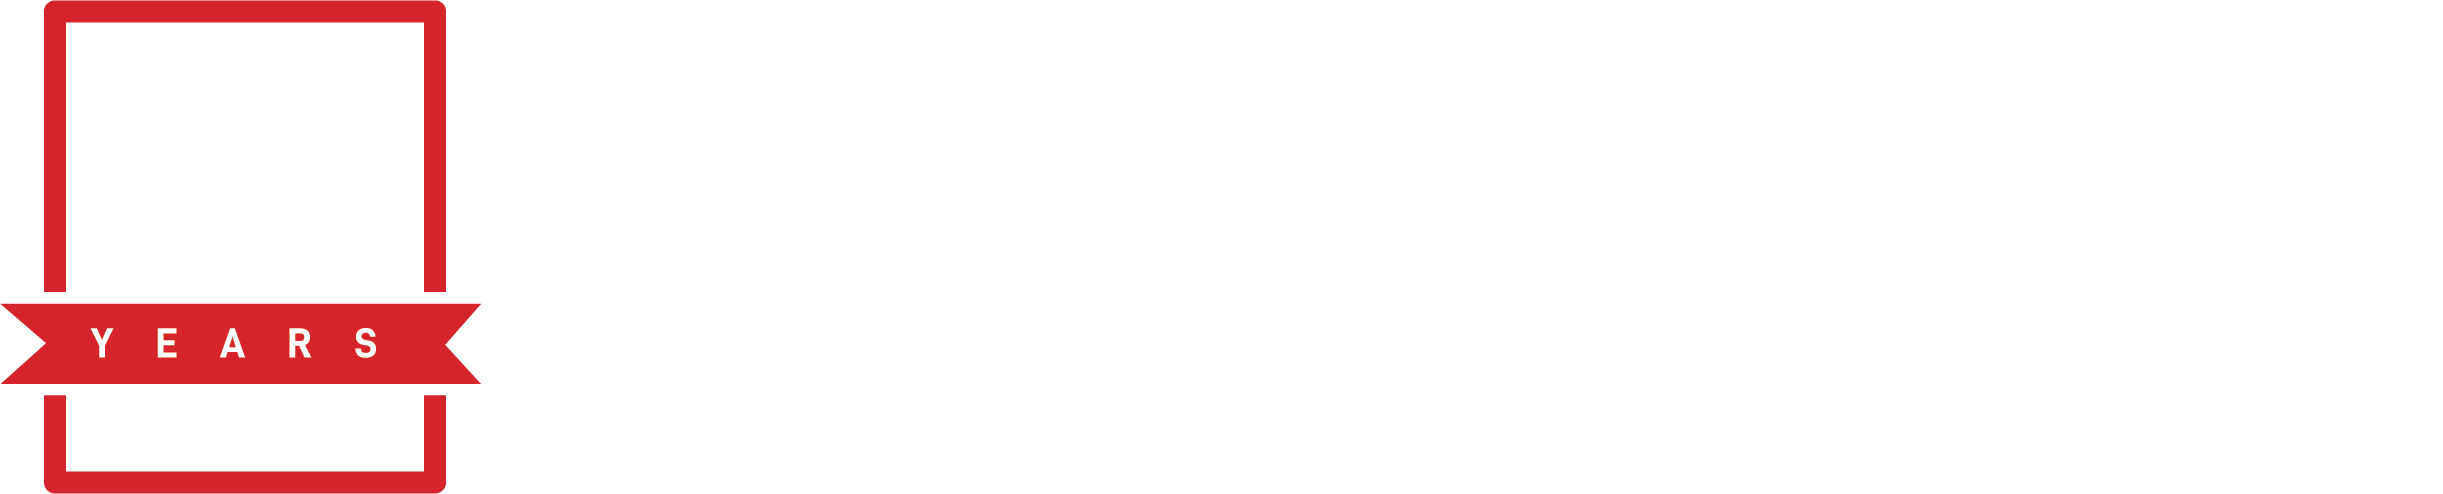 Stafford | Building on the Past. Developing the Future. 75 years